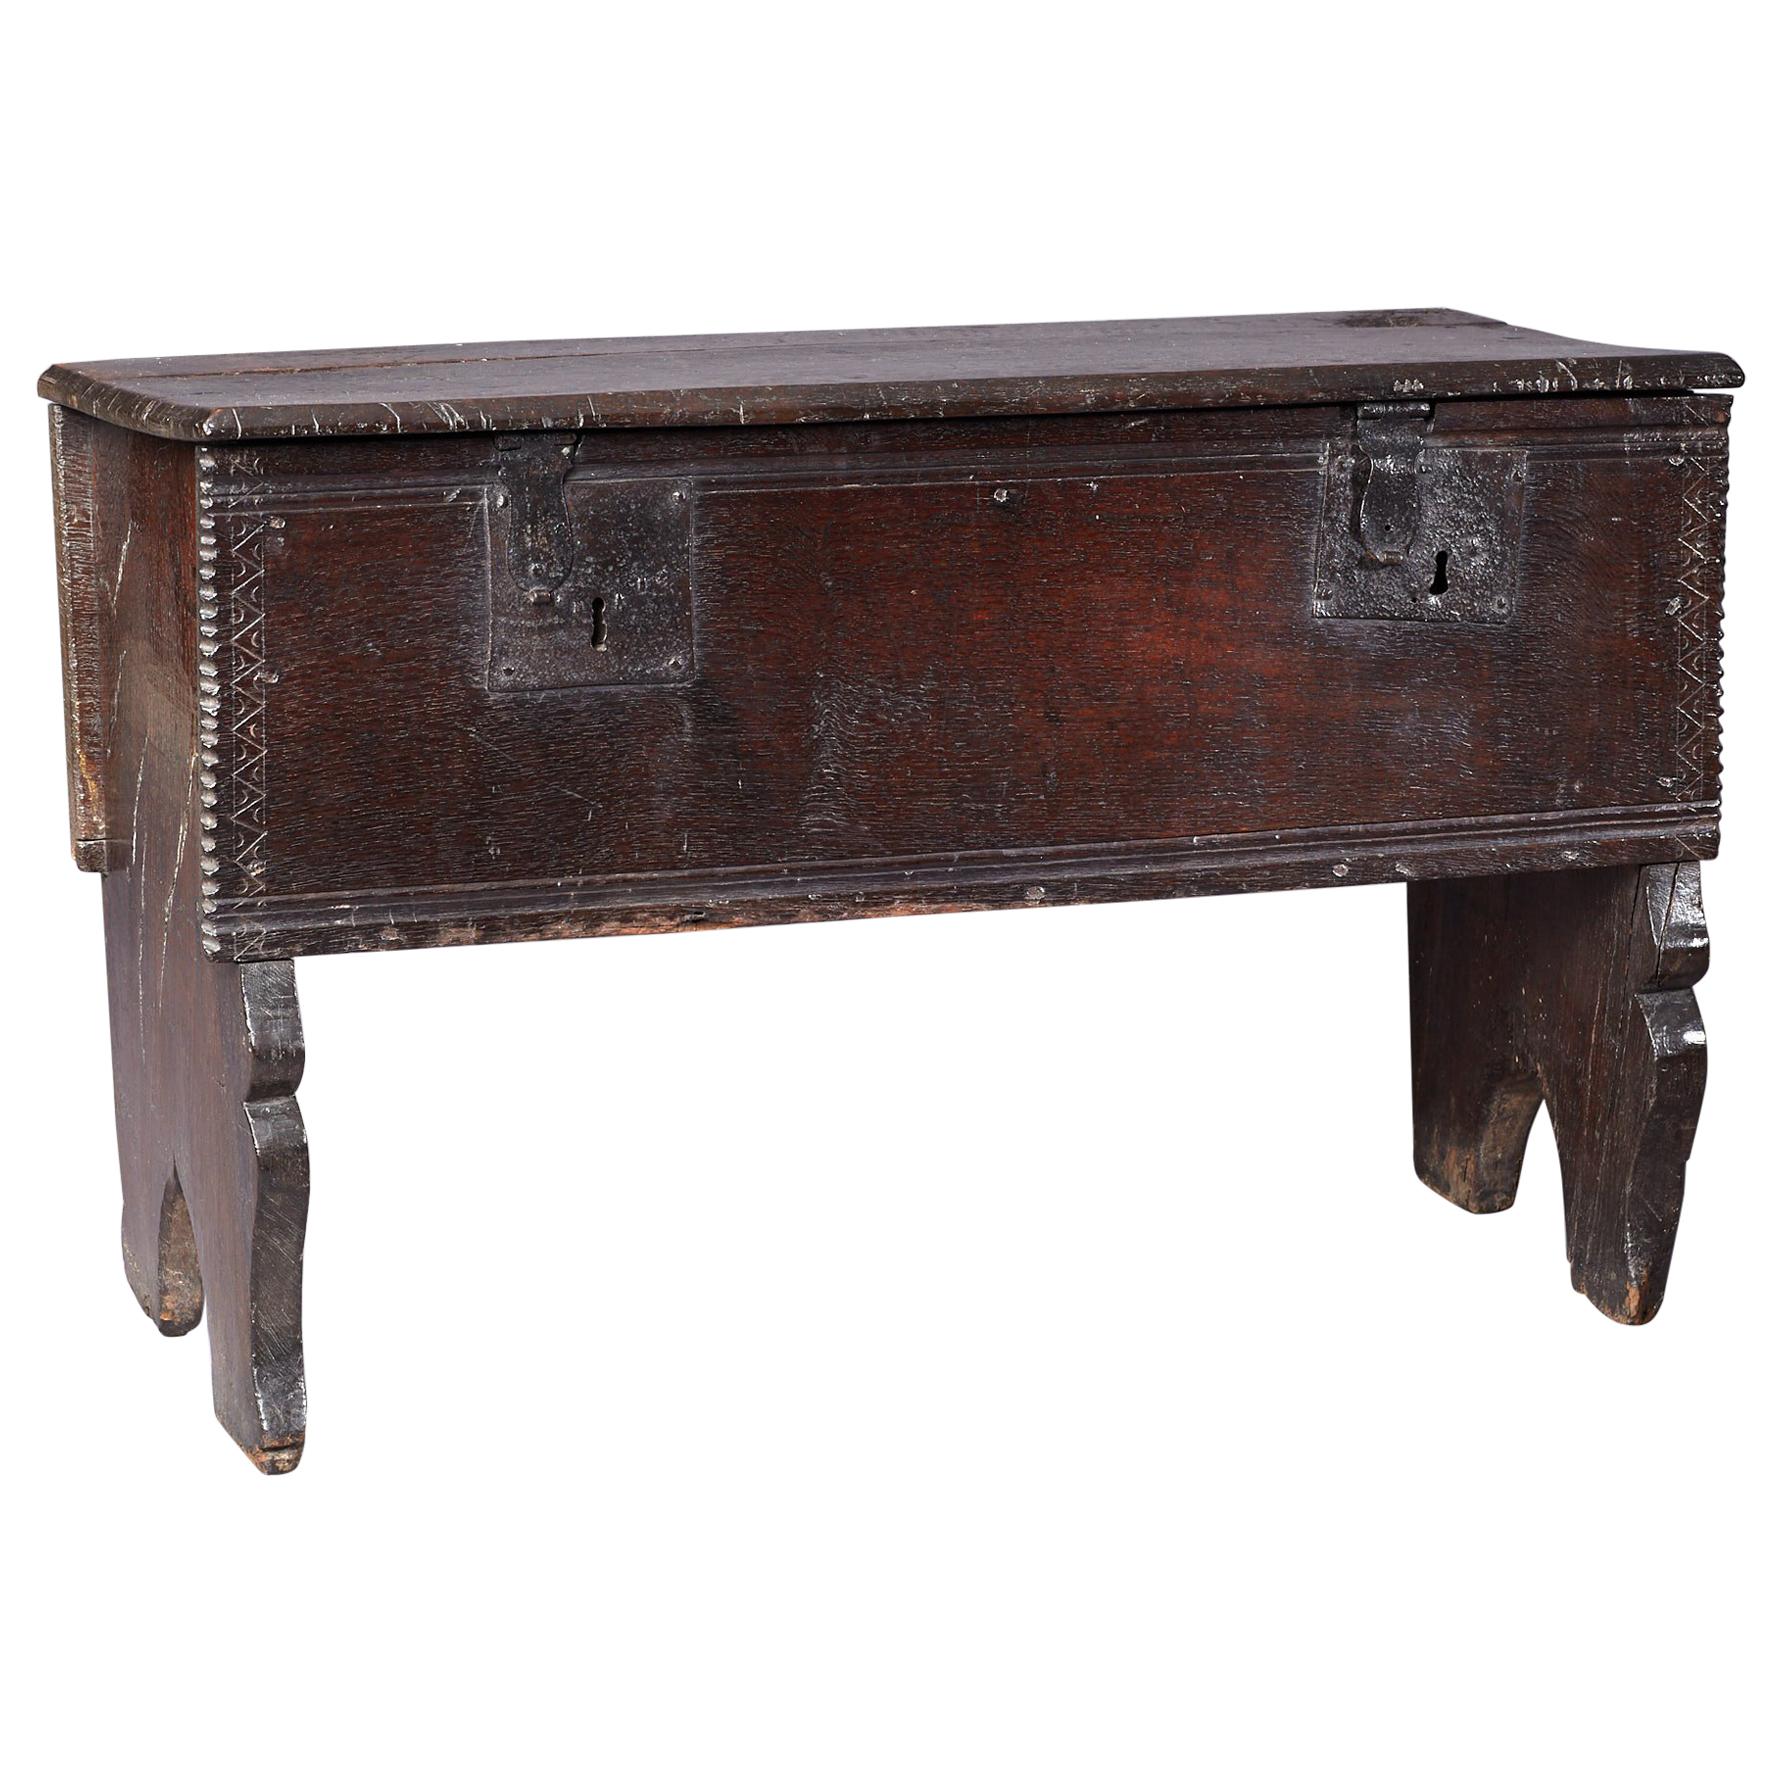 Medieval, Tudor Oak Boarded Chest, Henry VII / VIII, English, circa 1480-1530 For Sale